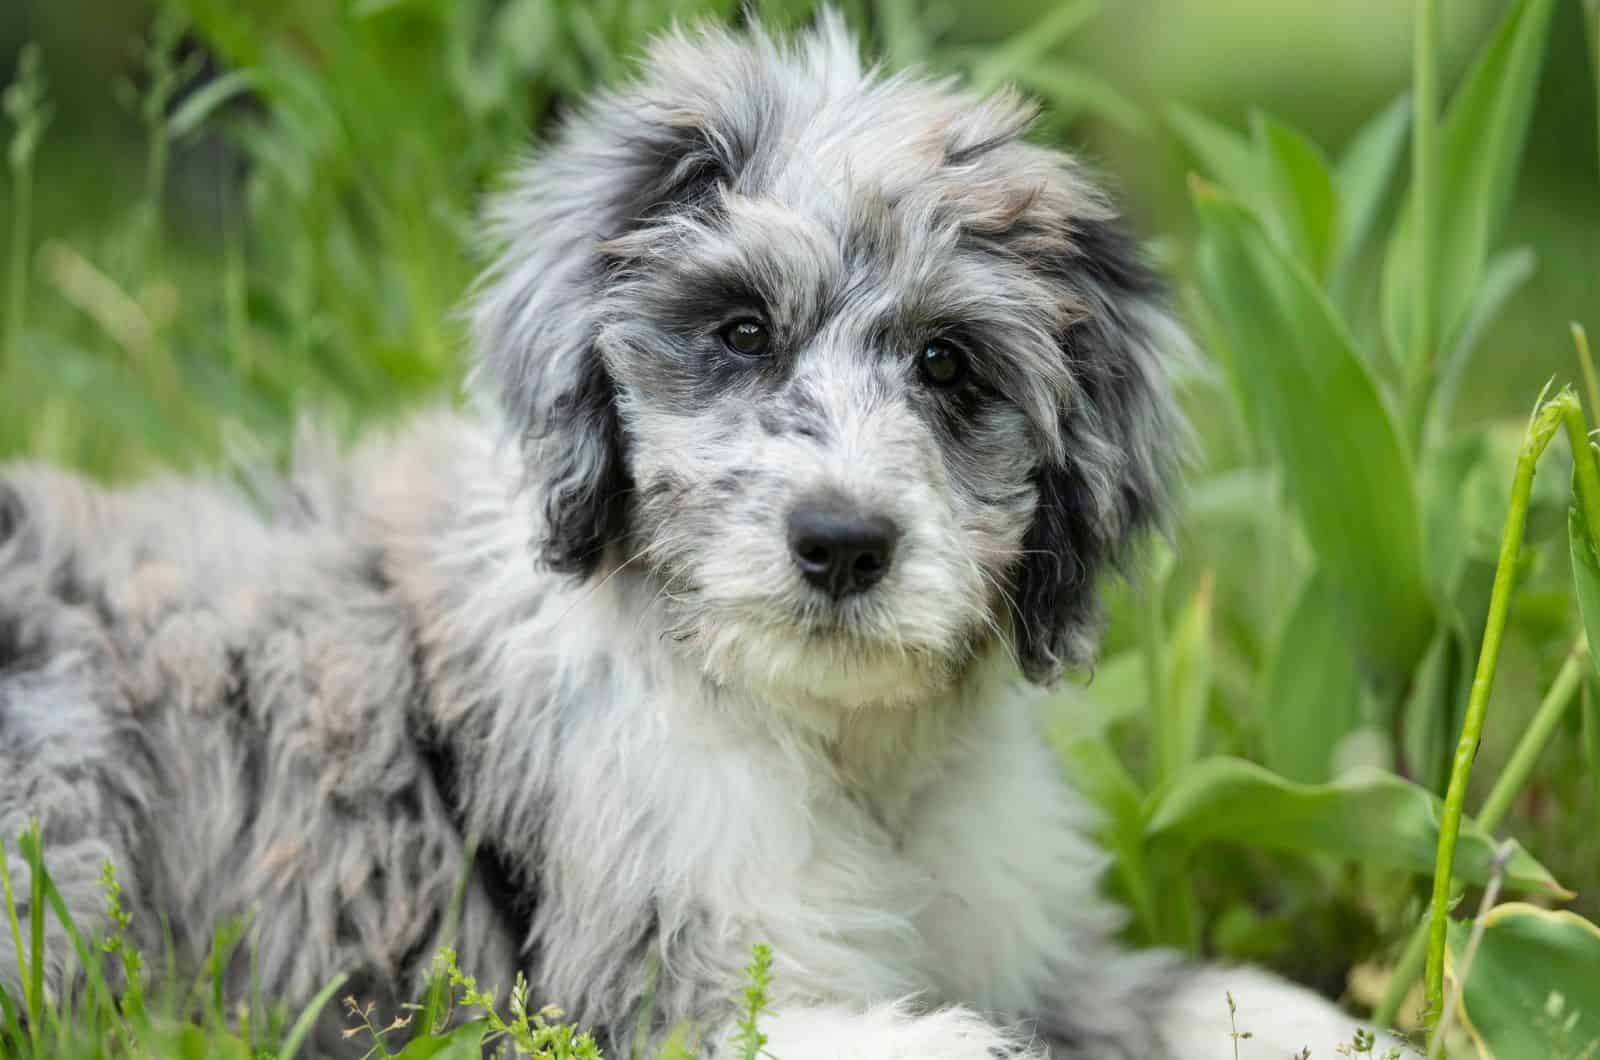 100 Mixed Dog Breeds You Didn’t Know Existed (With Pictures)